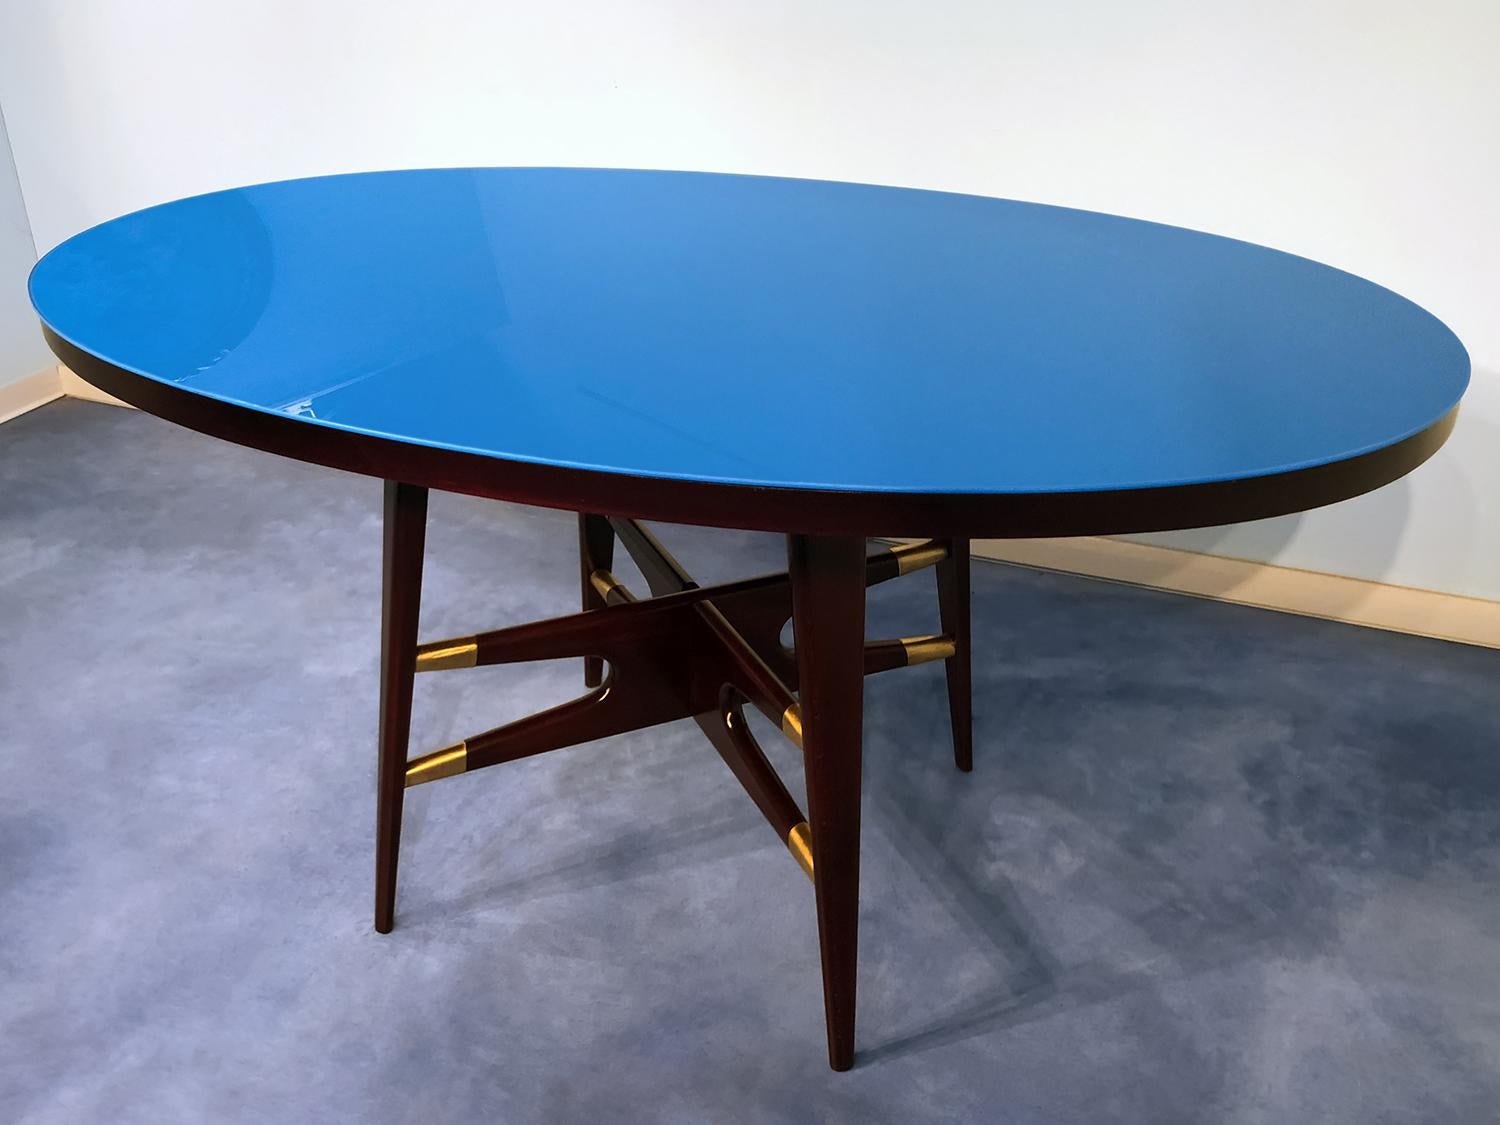 Fabulous dining table, very well designed by Silvio Cavatorta in the 1950s.
The uniqueness of its design is given by the wooden cross structure finished with fine brass details, in addition to its oval top in colored glass, which we have decided to